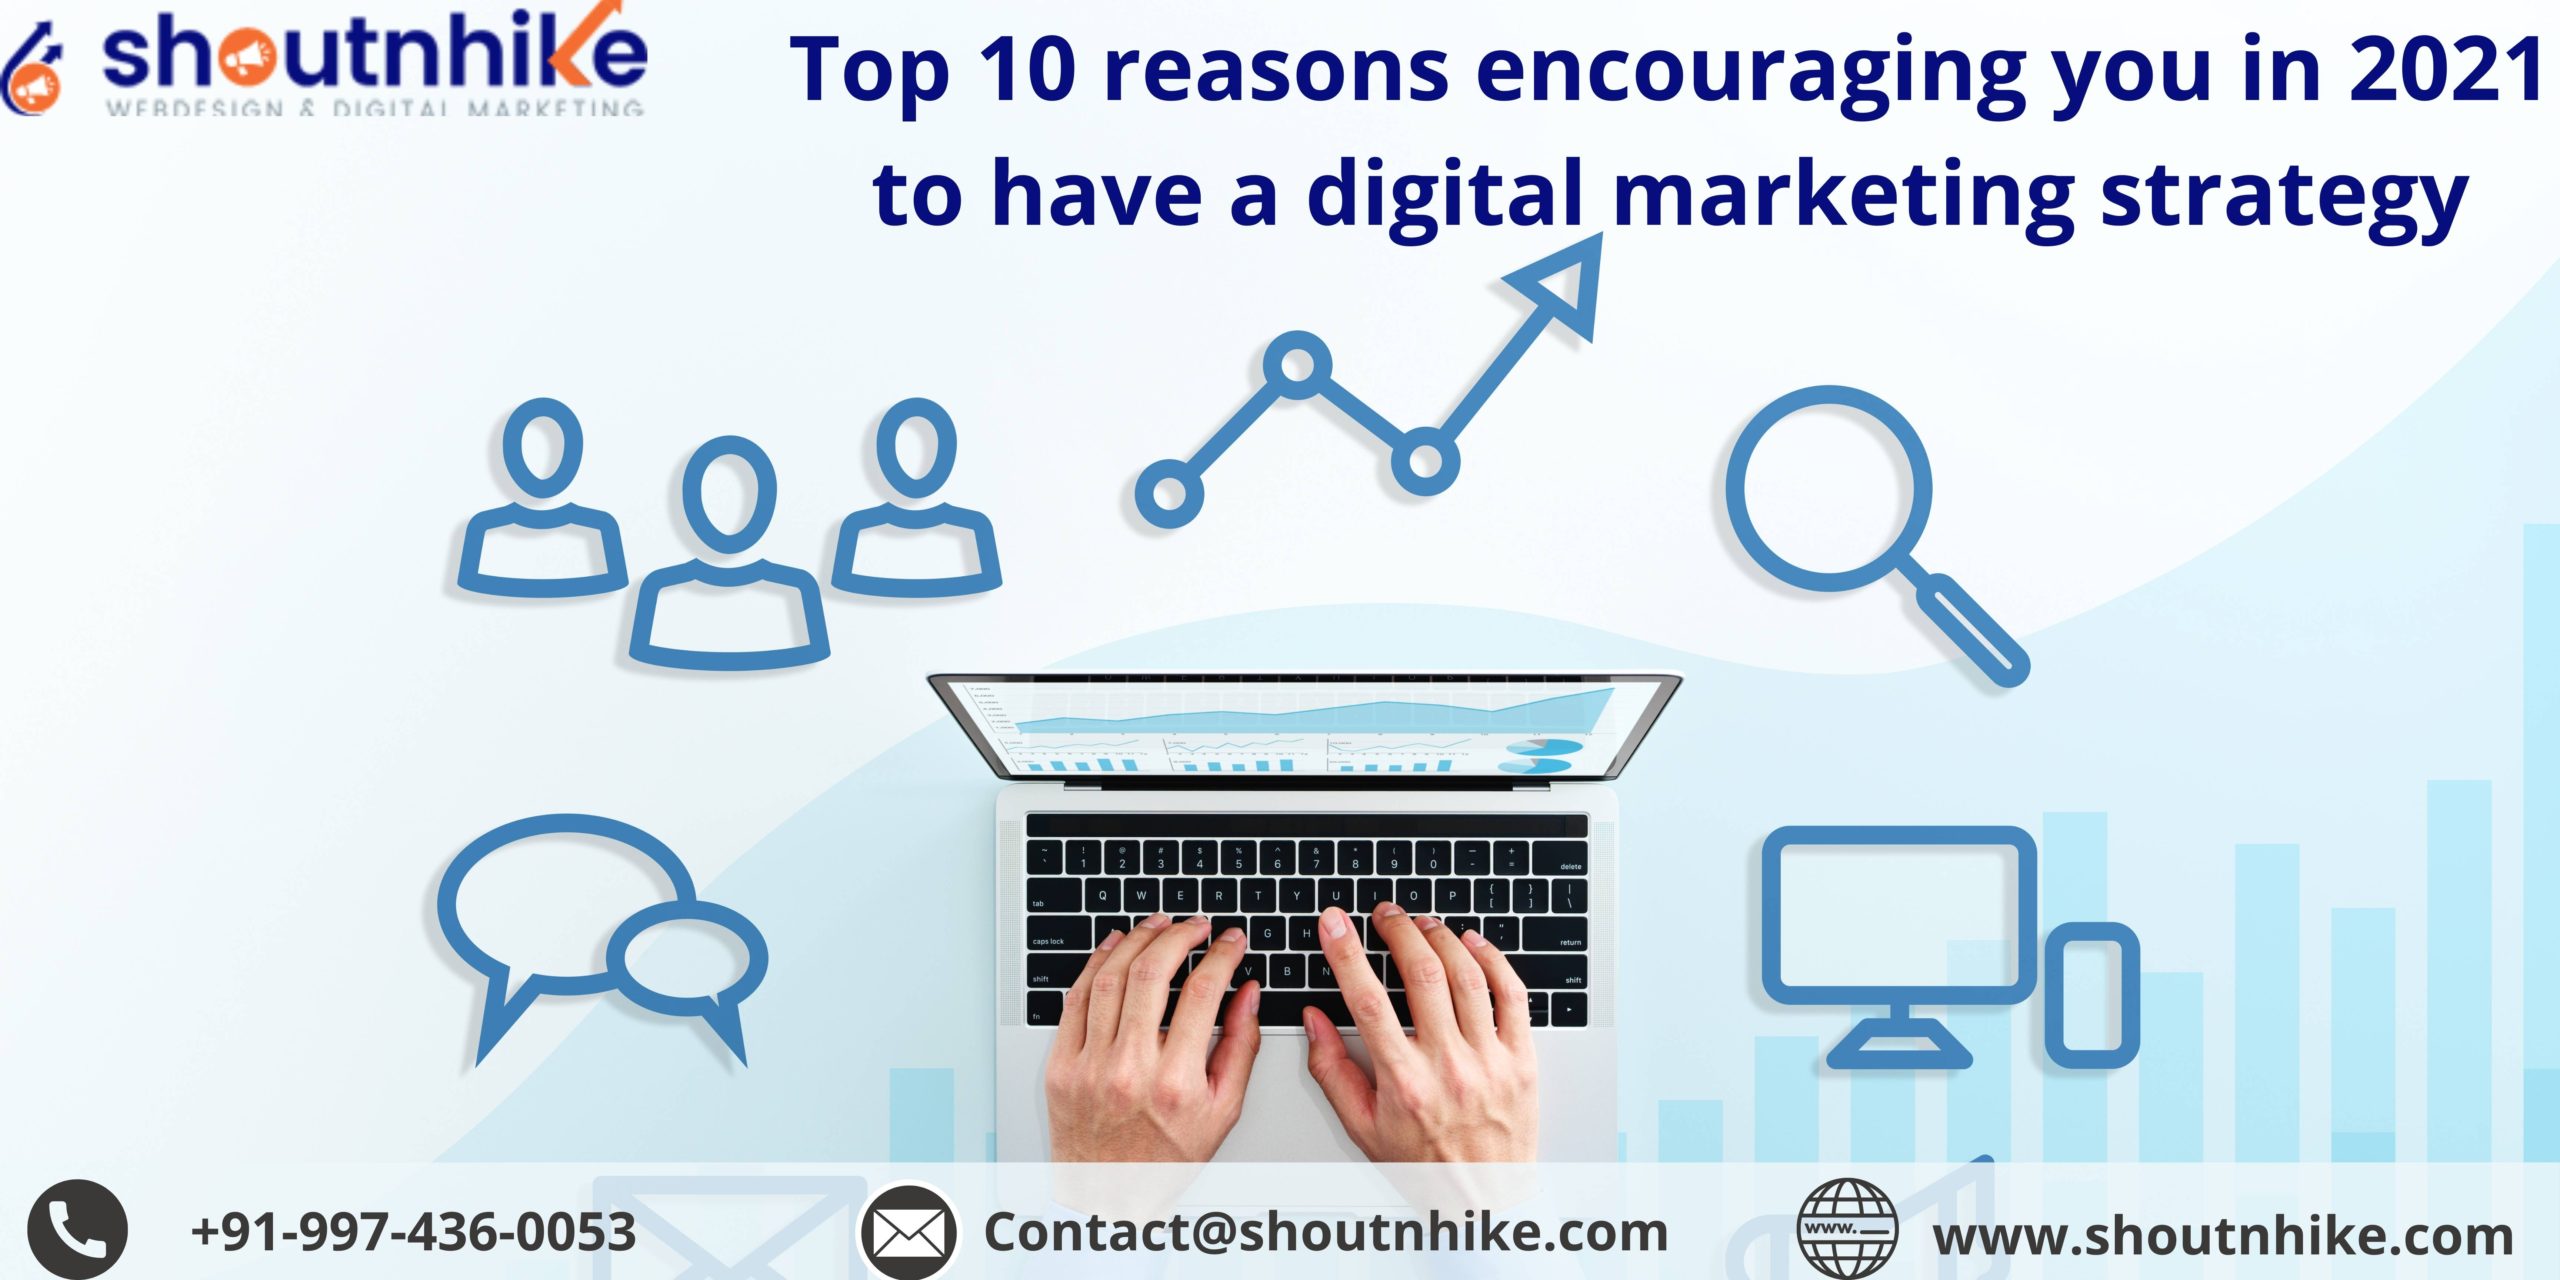 Top 10 reasons encouraging you in 2021 to have a digital marketing strategy